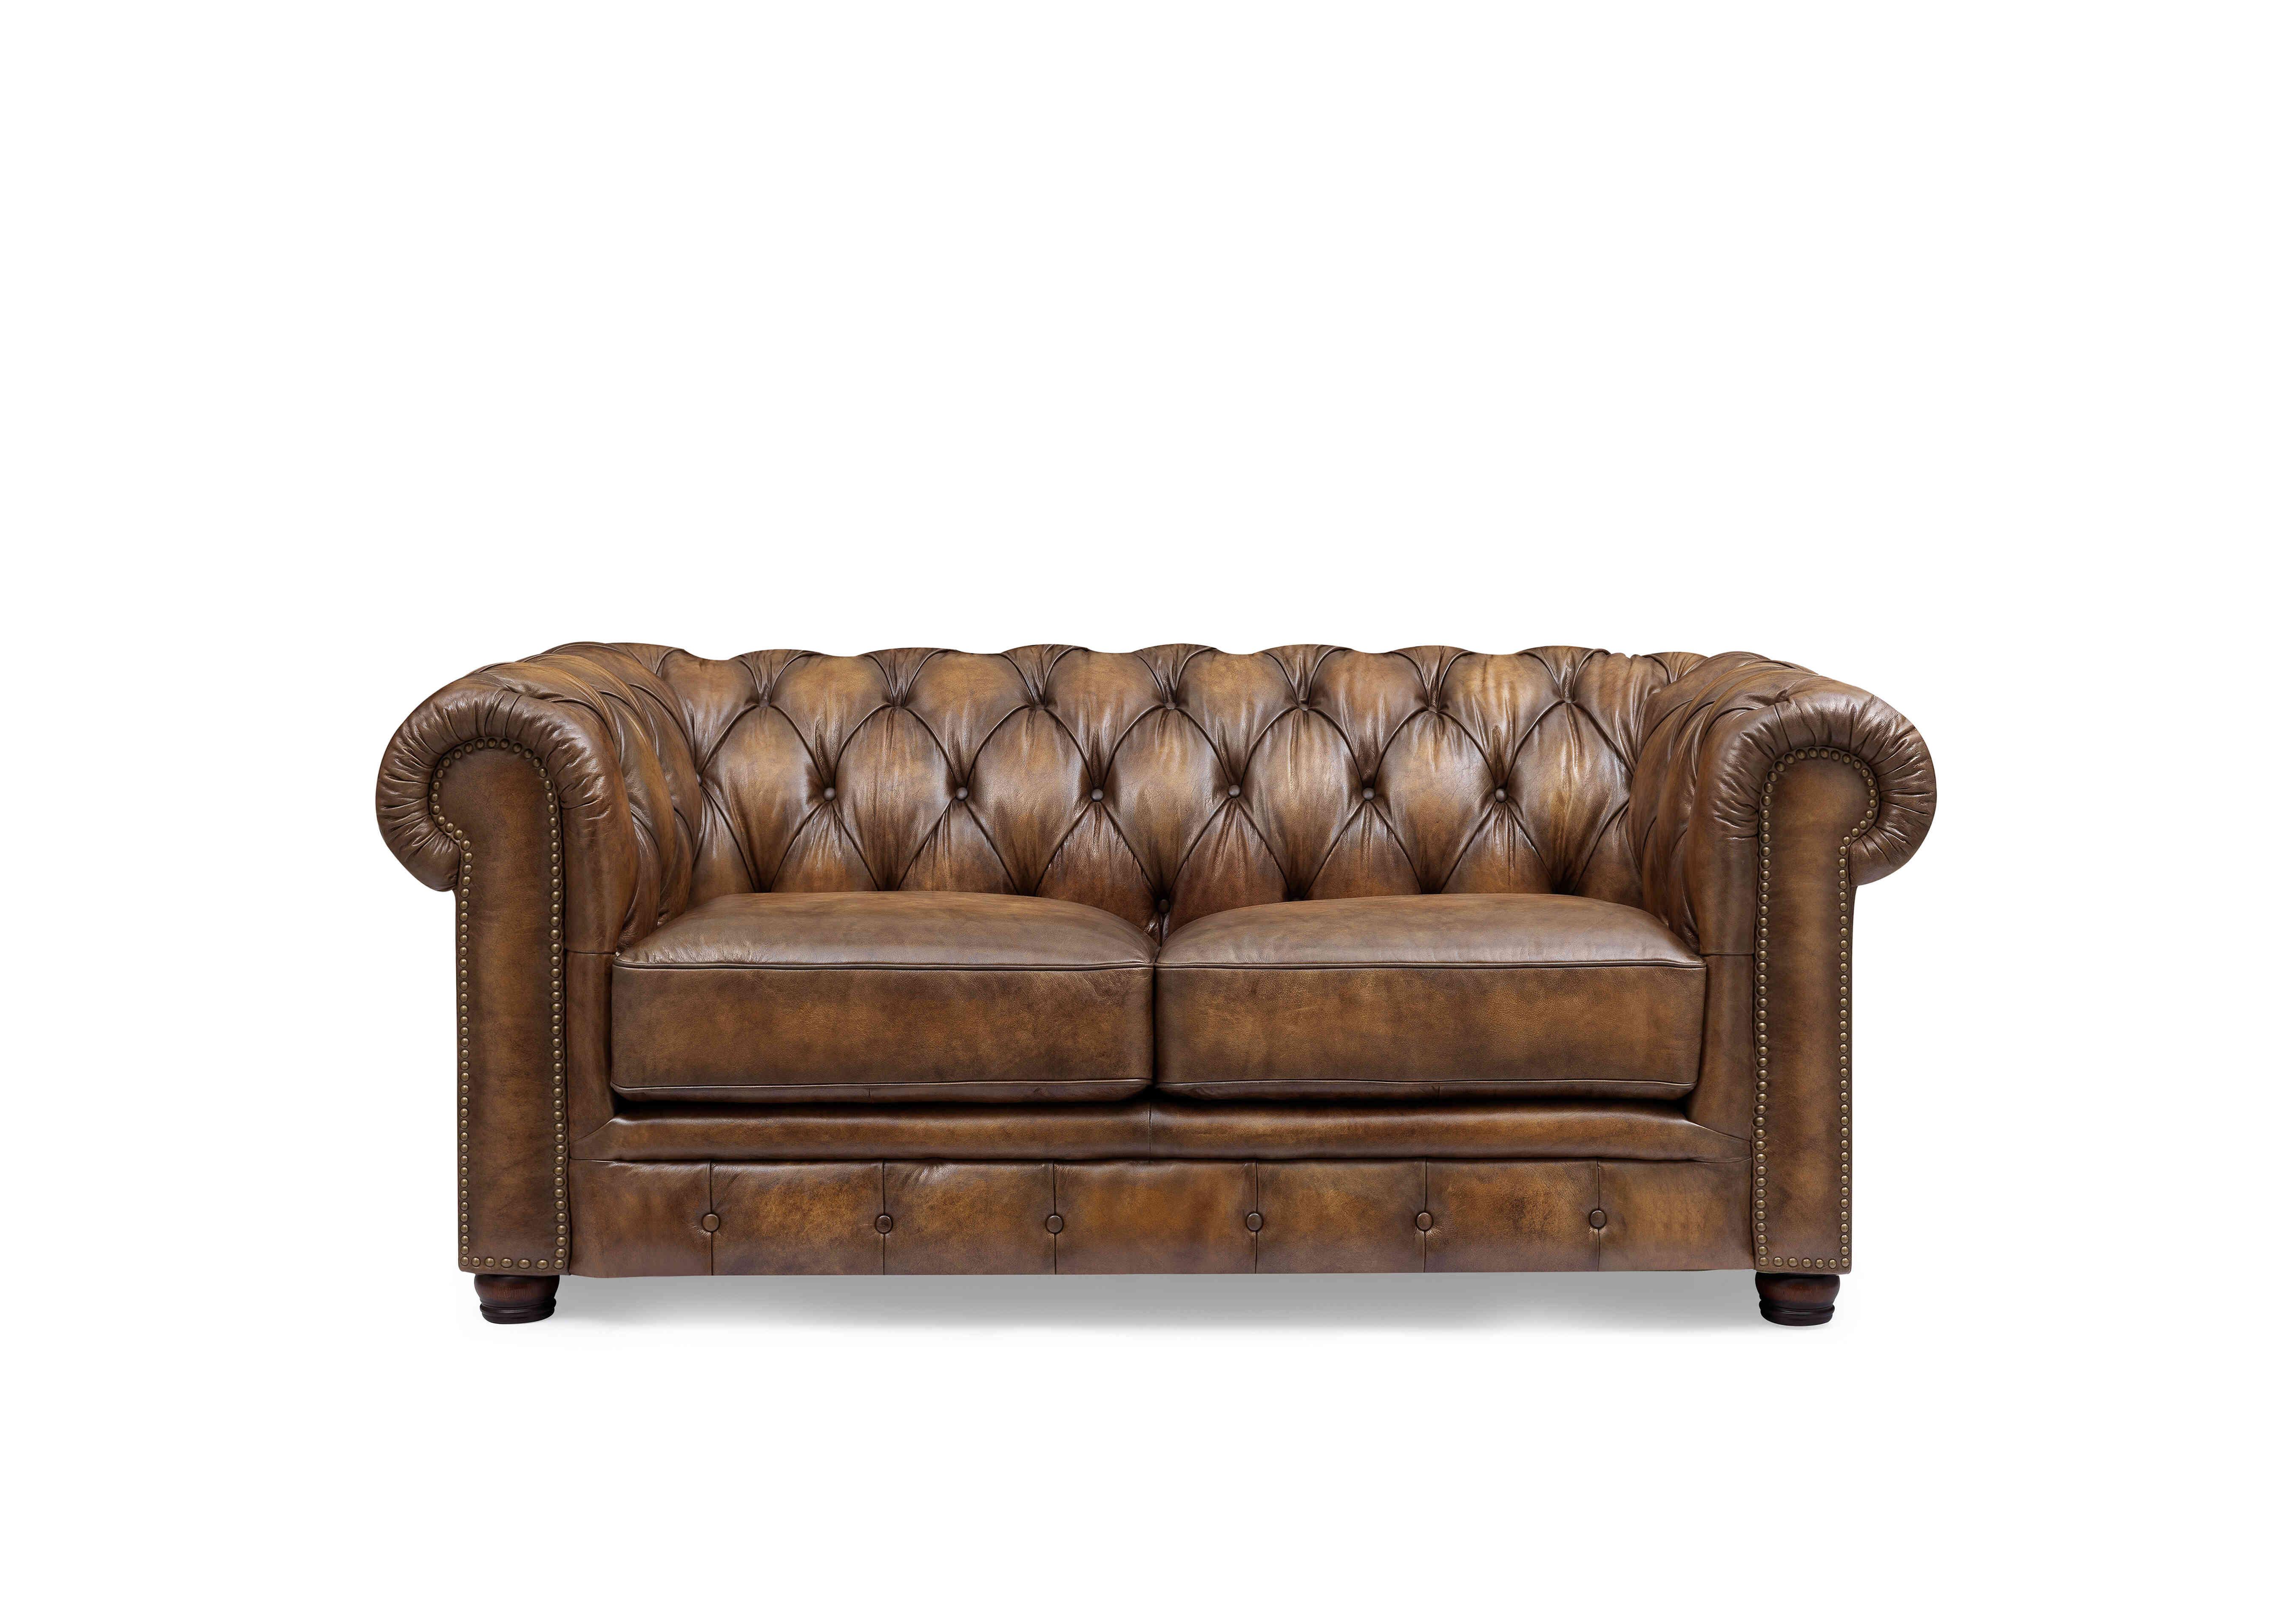 Shackleton 2 Seater Leather Chesterfield Sofa with USB-C in X3y1-1981ls Saddle on Furniture Village